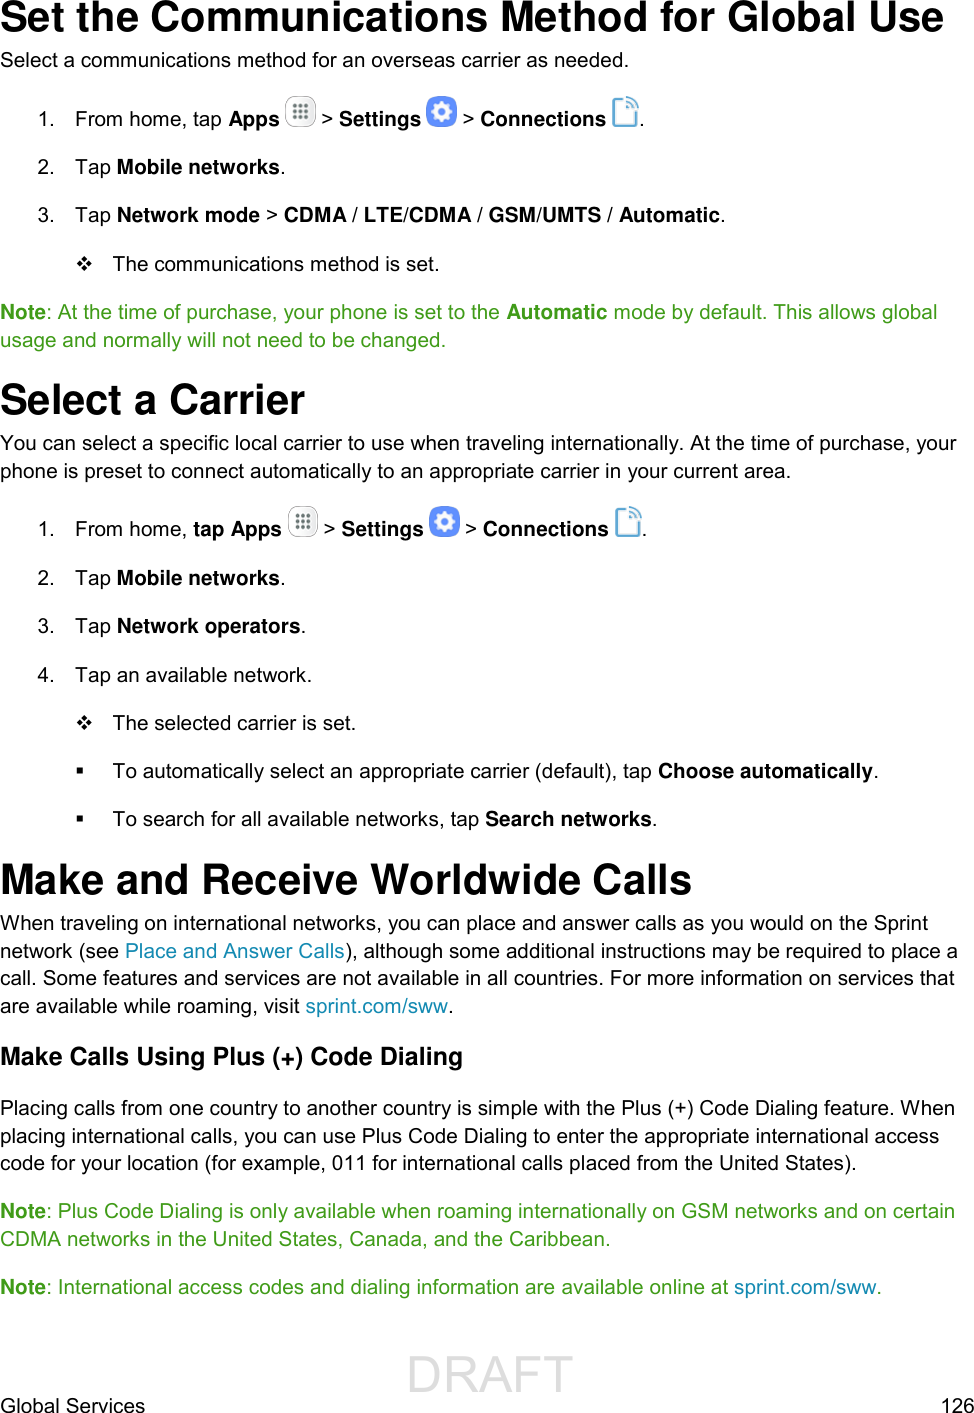                  DRAFT FOR INTERNAL USE ONLYGlobal Services  126 Set the Communications Method for Global Use Select a communications method for an overseas carrier as needed. 1.  From home, tap Apps   &gt; Settings   &gt; Connections  .  2.  Tap Mobile networks. 3.  Tap Network mode &gt; CDMA / LTE/CDMA / GSM/UMTS / Automatic.    The communications method is set. Note: At the time of purchase, your phone is set to the Automatic mode by default. This allows global usage and normally will not need to be changed. Select a Carrier You can select a specific local carrier to use when traveling internationally. At the time of purchase, your phone is preset to connect automatically to an appropriate carrier in your current area. 1.  From home, tap Apps   &gt; Settings   &gt; Connections  . 2.  Tap Mobile networks. 3.  Tap Network operators.  4.  Tap an available network.   The selected carrier is set.   To automatically select an appropriate carrier (default), tap Choose automatically.   To search for all available networks, tap Search networks. Make and Receive Worldwide Calls  When traveling on international networks, you can place and answer calls as you would on the Sprint network (see Place and Answer Calls), although some additional instructions may be required to place a call. Some features and services are not available in all countries. For more information on services that are available while roaming, visit sprint.com/sww. Make Calls Using Plus (+) Code Dialing Placing calls from one country to another country is simple with the Plus (+) Code Dialing feature. When placing international calls, you can use Plus Code Dialing to enter the appropriate international access code for your location (for example, 011 for international calls placed from the United States). Note: Plus Code Dialing is only available when roaming internationally on GSM networks and on certain CDMA networks in the United States, Canada, and the Caribbean.  Note: International access codes and dialing information are available online at sprint.com/sww. 